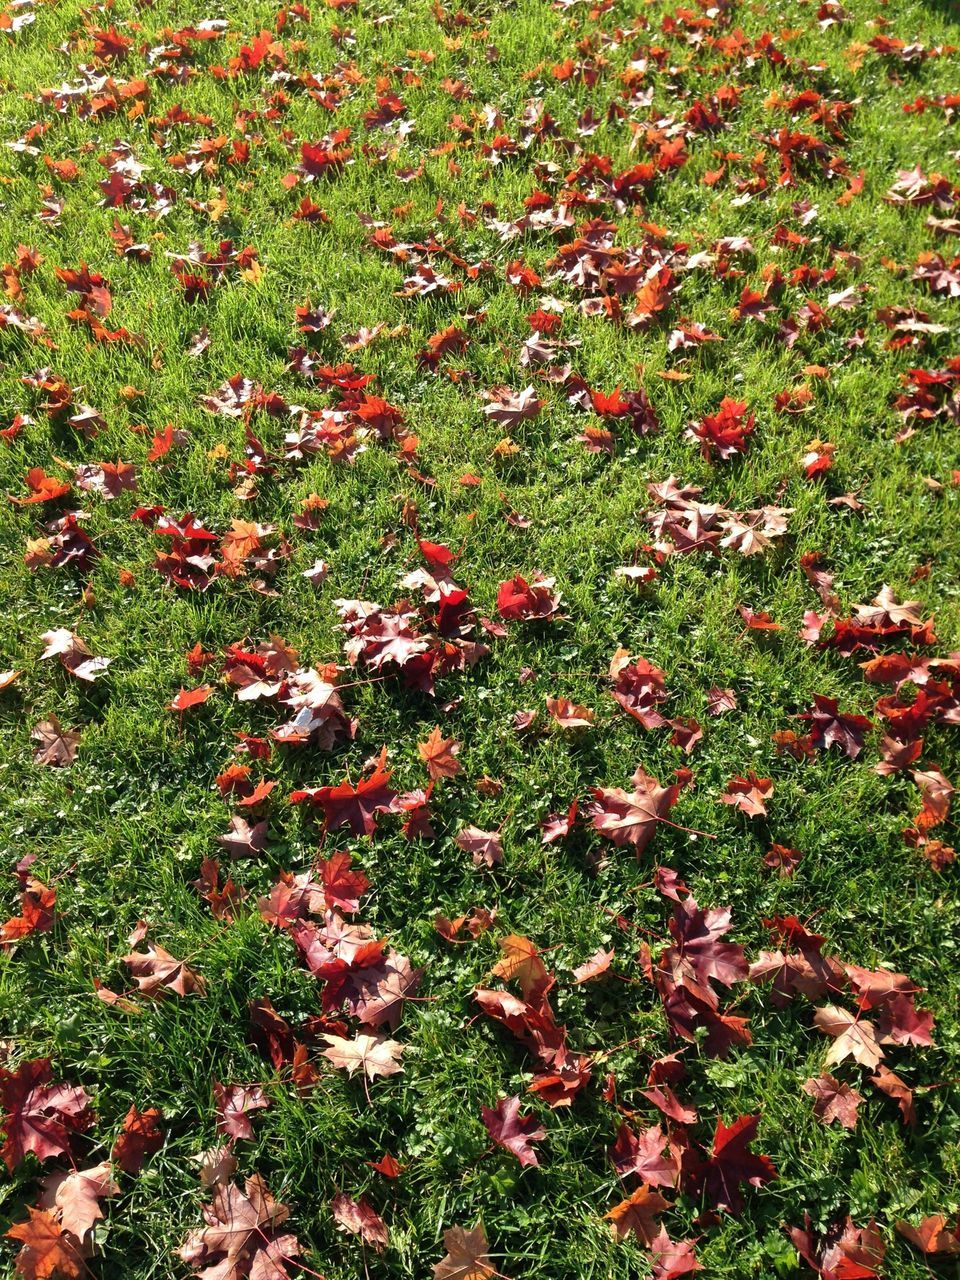 grass, autumn, field, change, leaf, high angle view, grassy, season, nature, growth, green color, red, fallen, beauty in nature, tranquility, leaves, day, plant, outdoors, no people